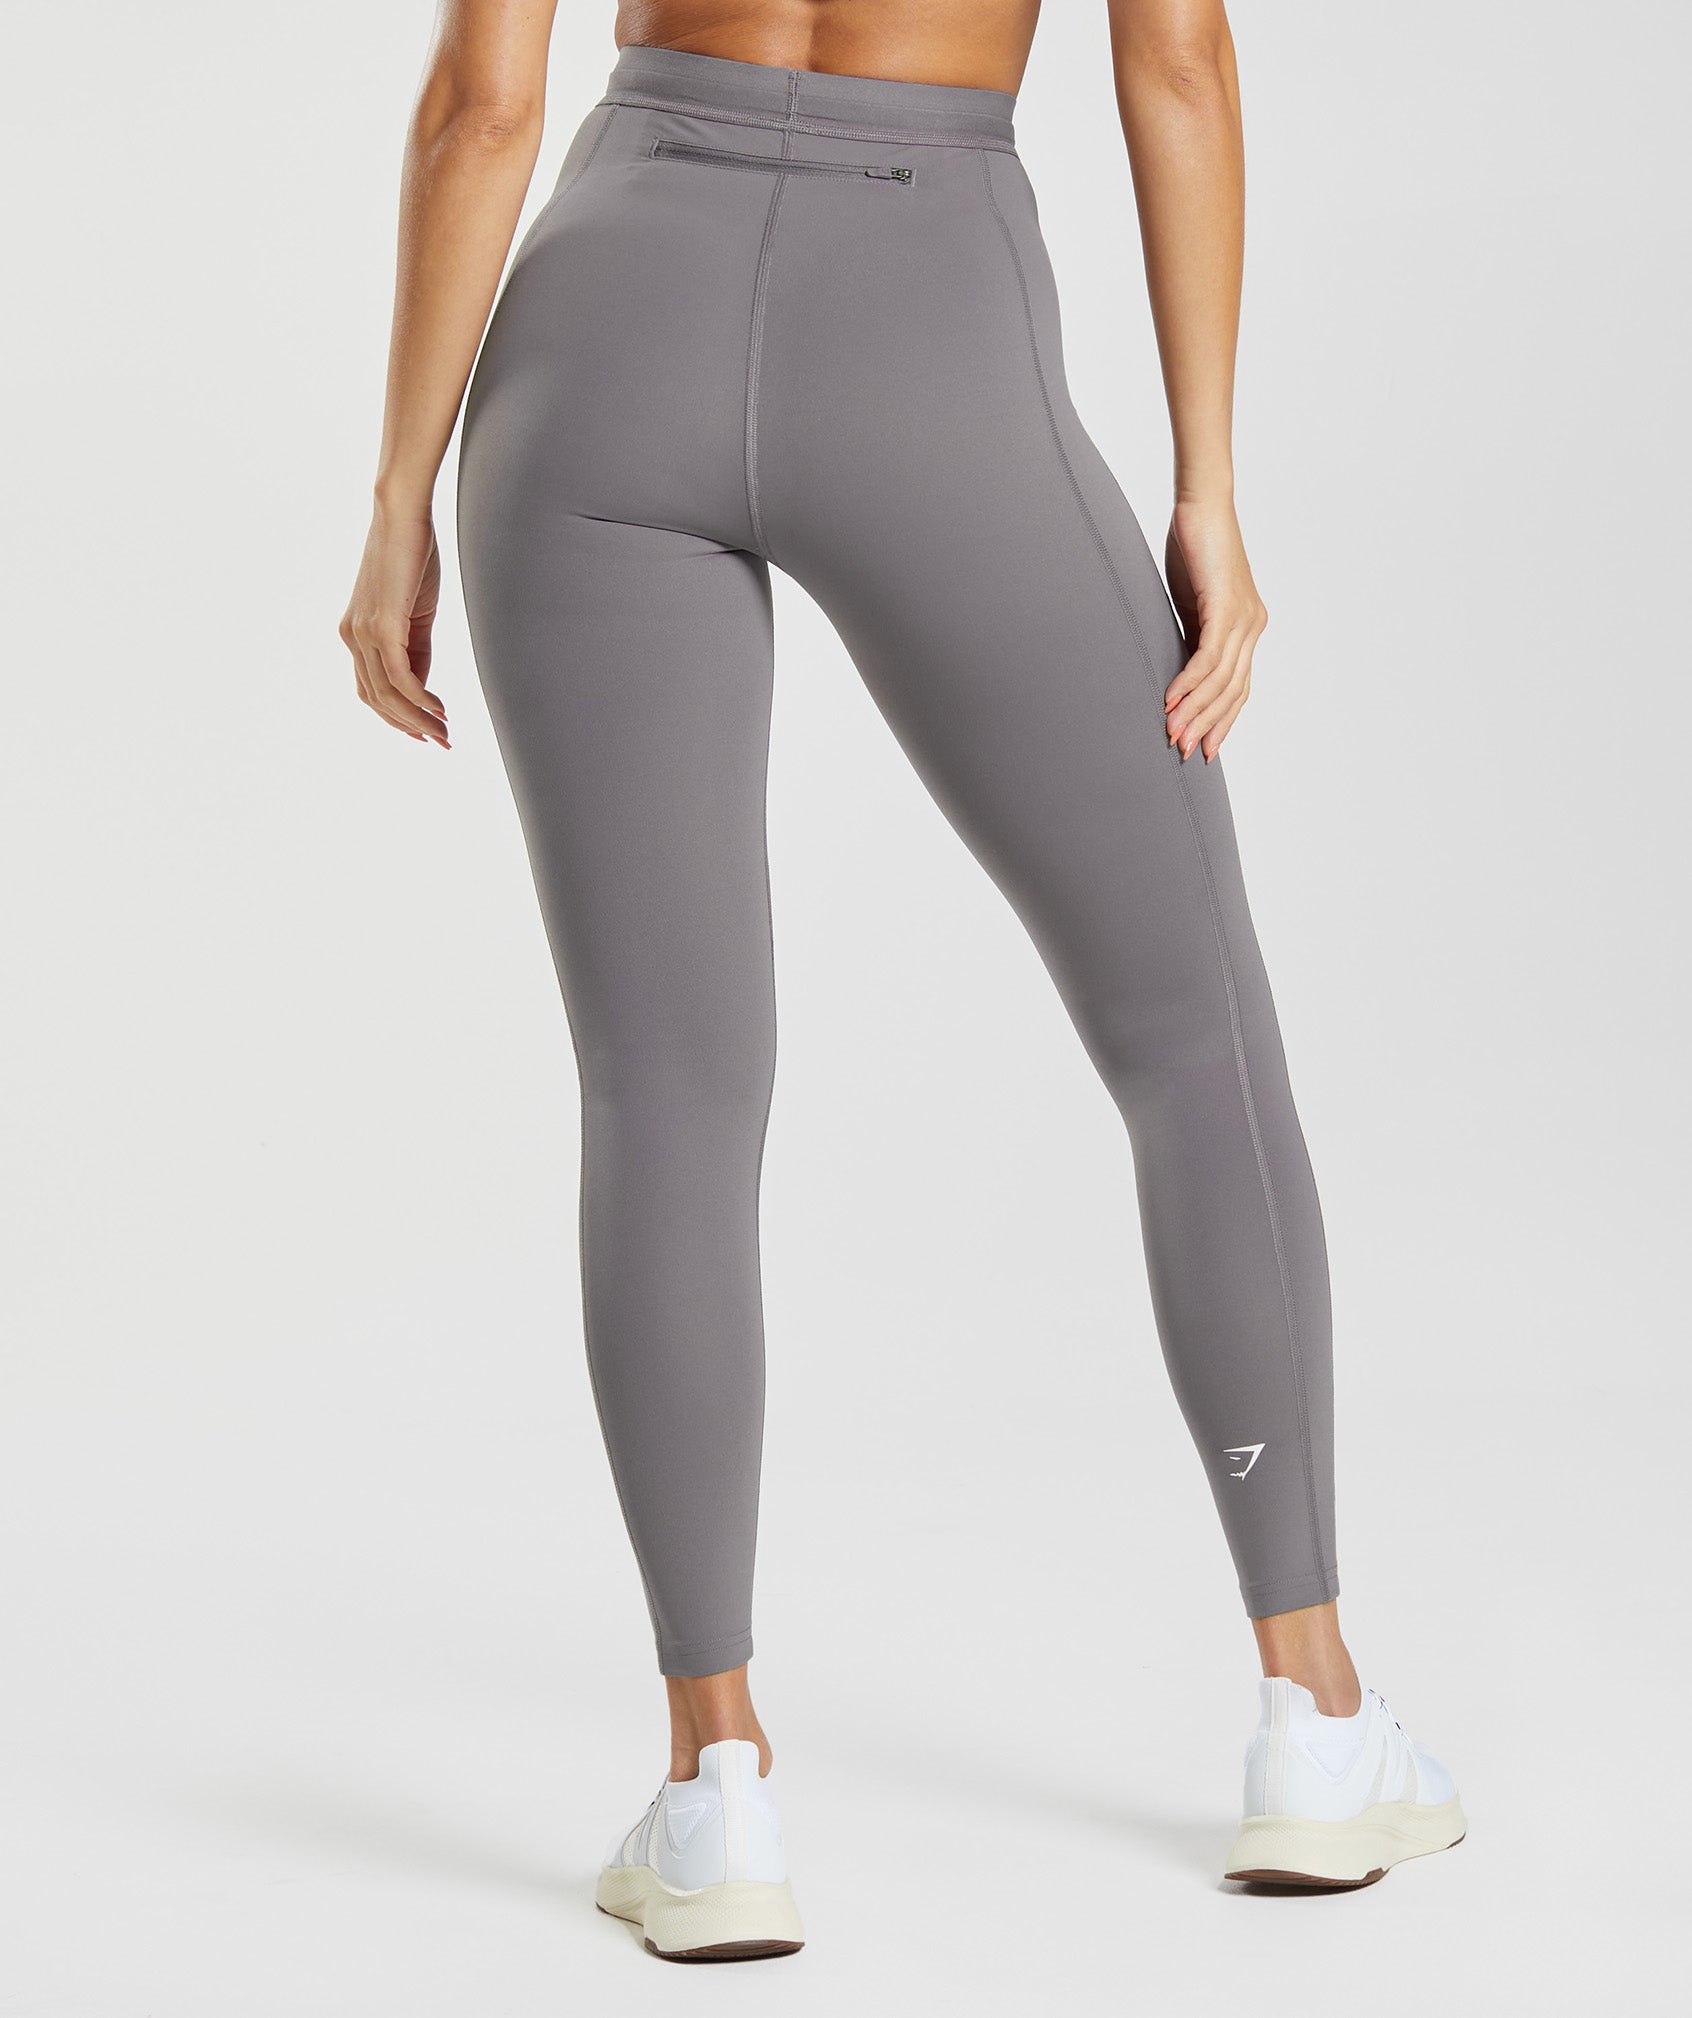 High Waisted Thermal Gym High Waisted Running Leggings In Grey For Sexy  Look From Premium_fashion, $18.12